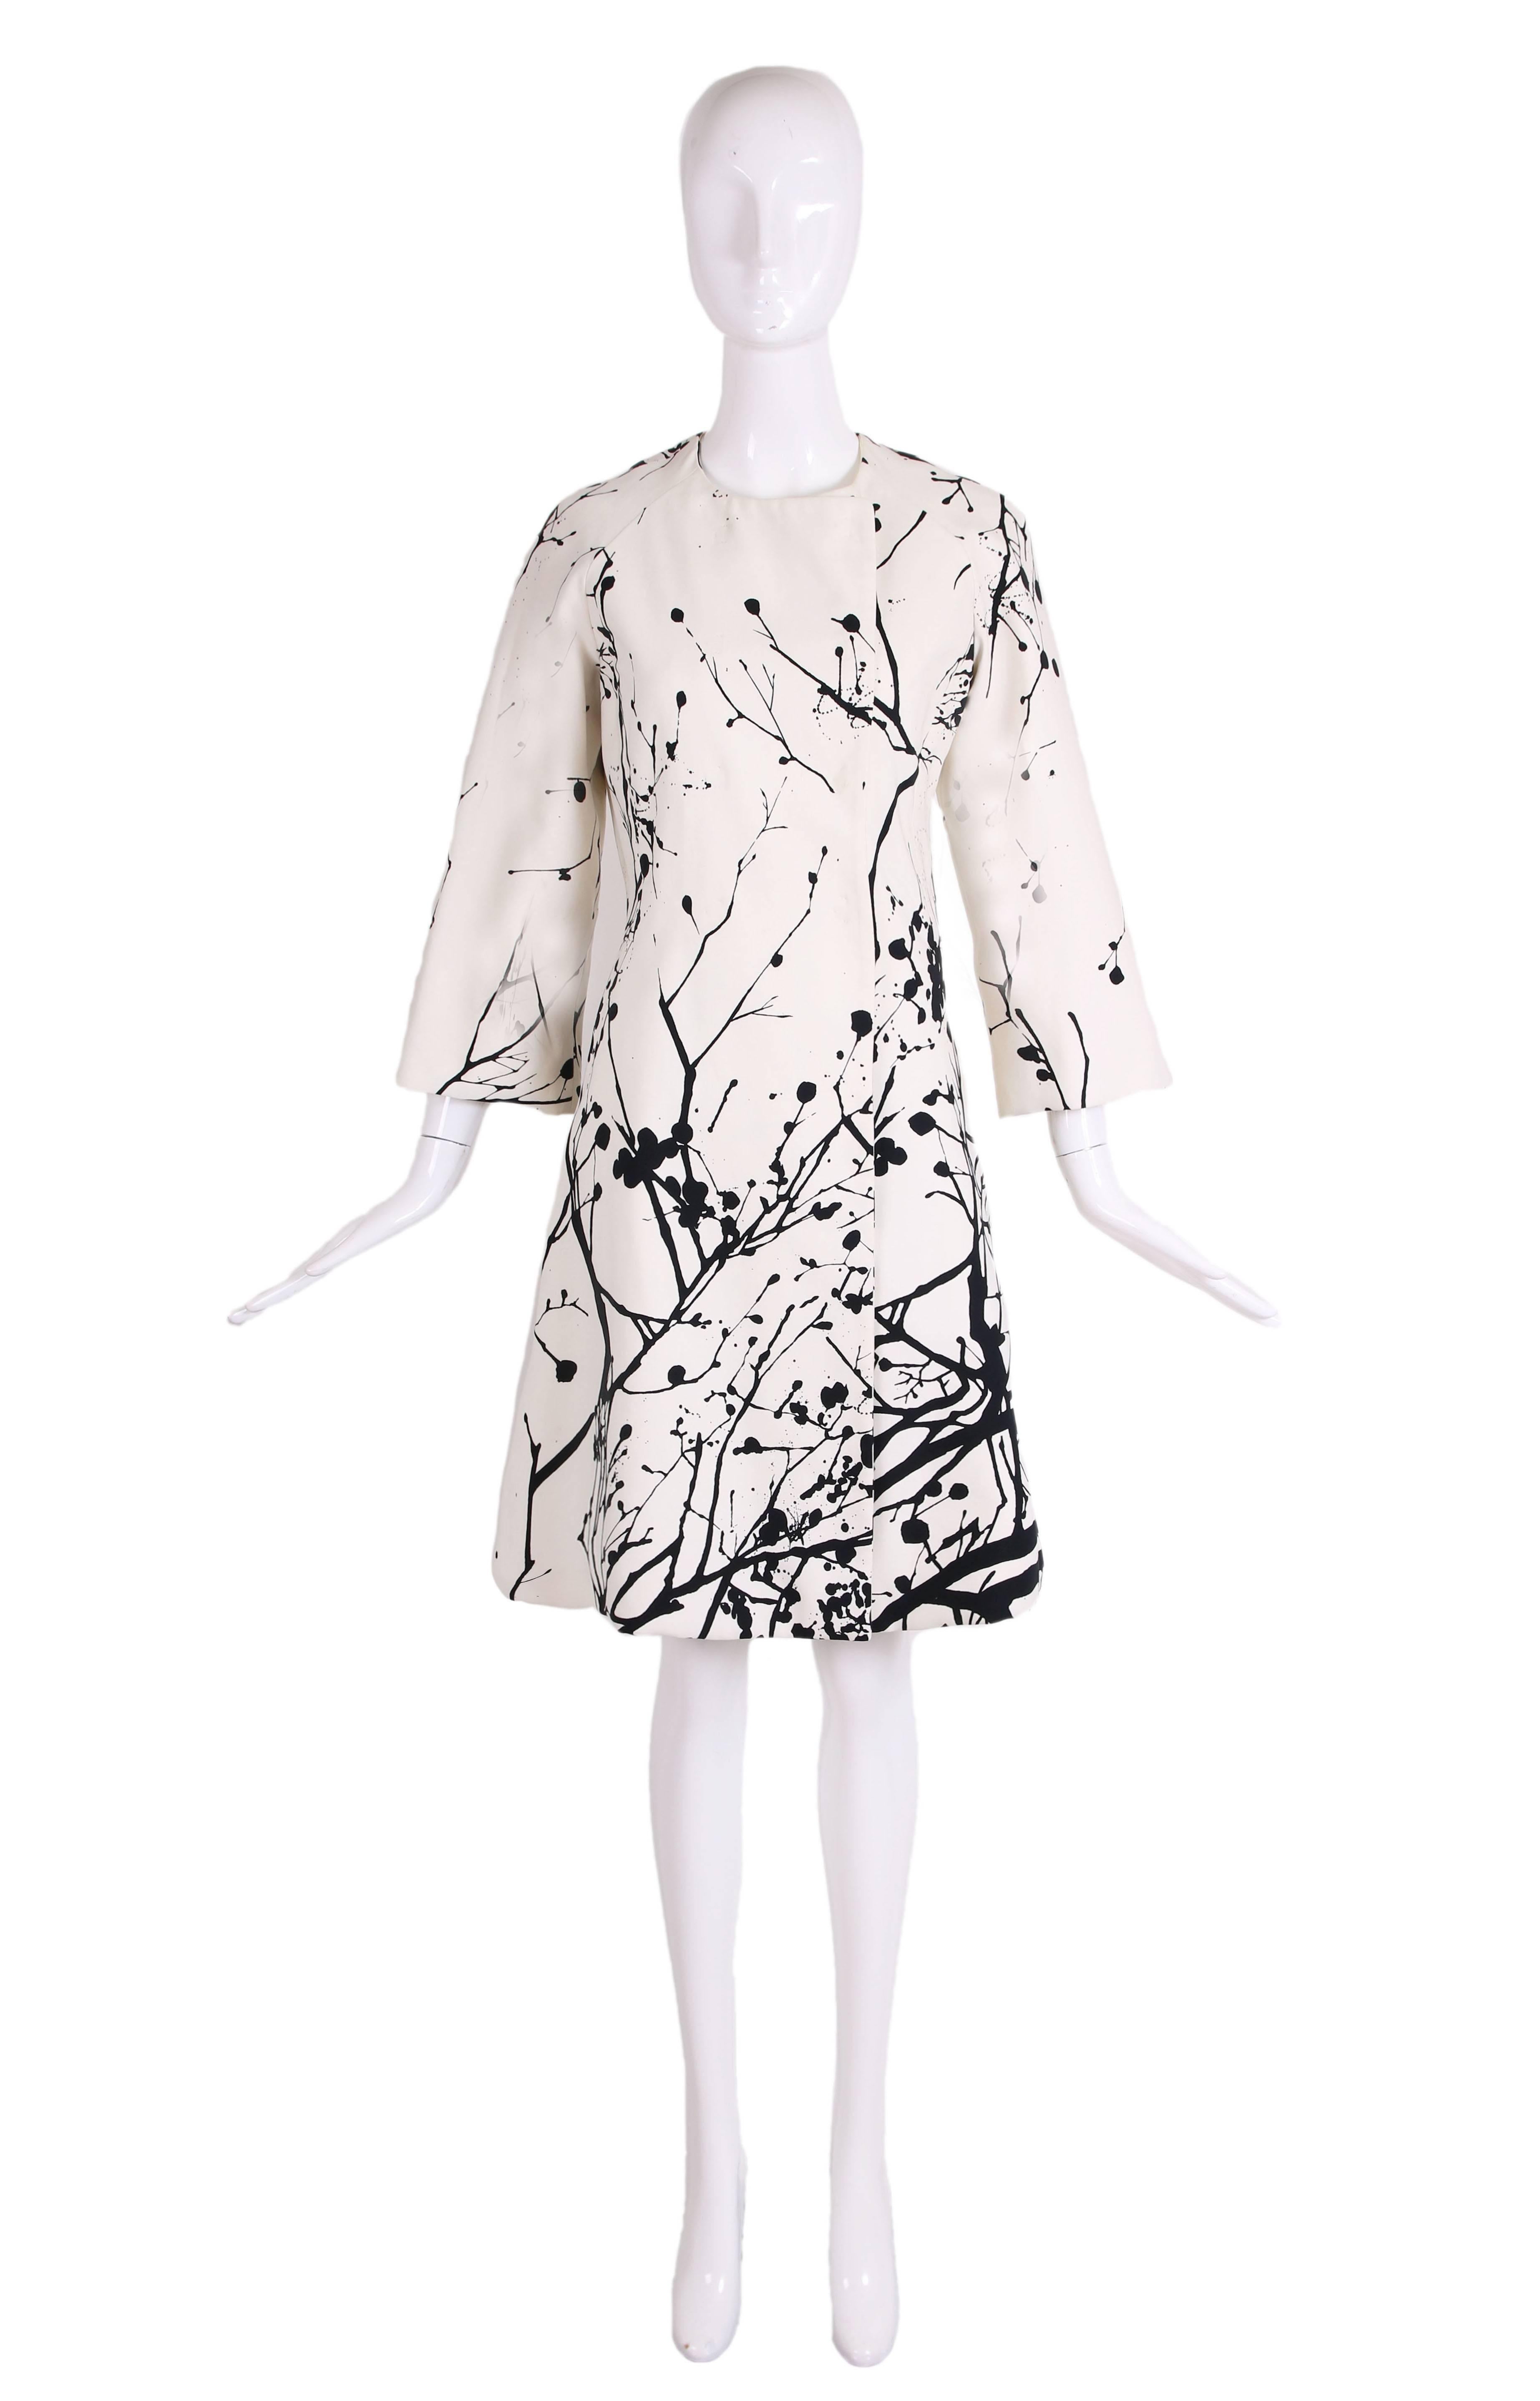 Tuleh black and white abstract coat with an abstract print suggestive of twigs and leaves. Coat fastens down the front with two sets of hidden hook and bar metal closures and features raglan sleeves. There is no fabric tag but the fabric appears to